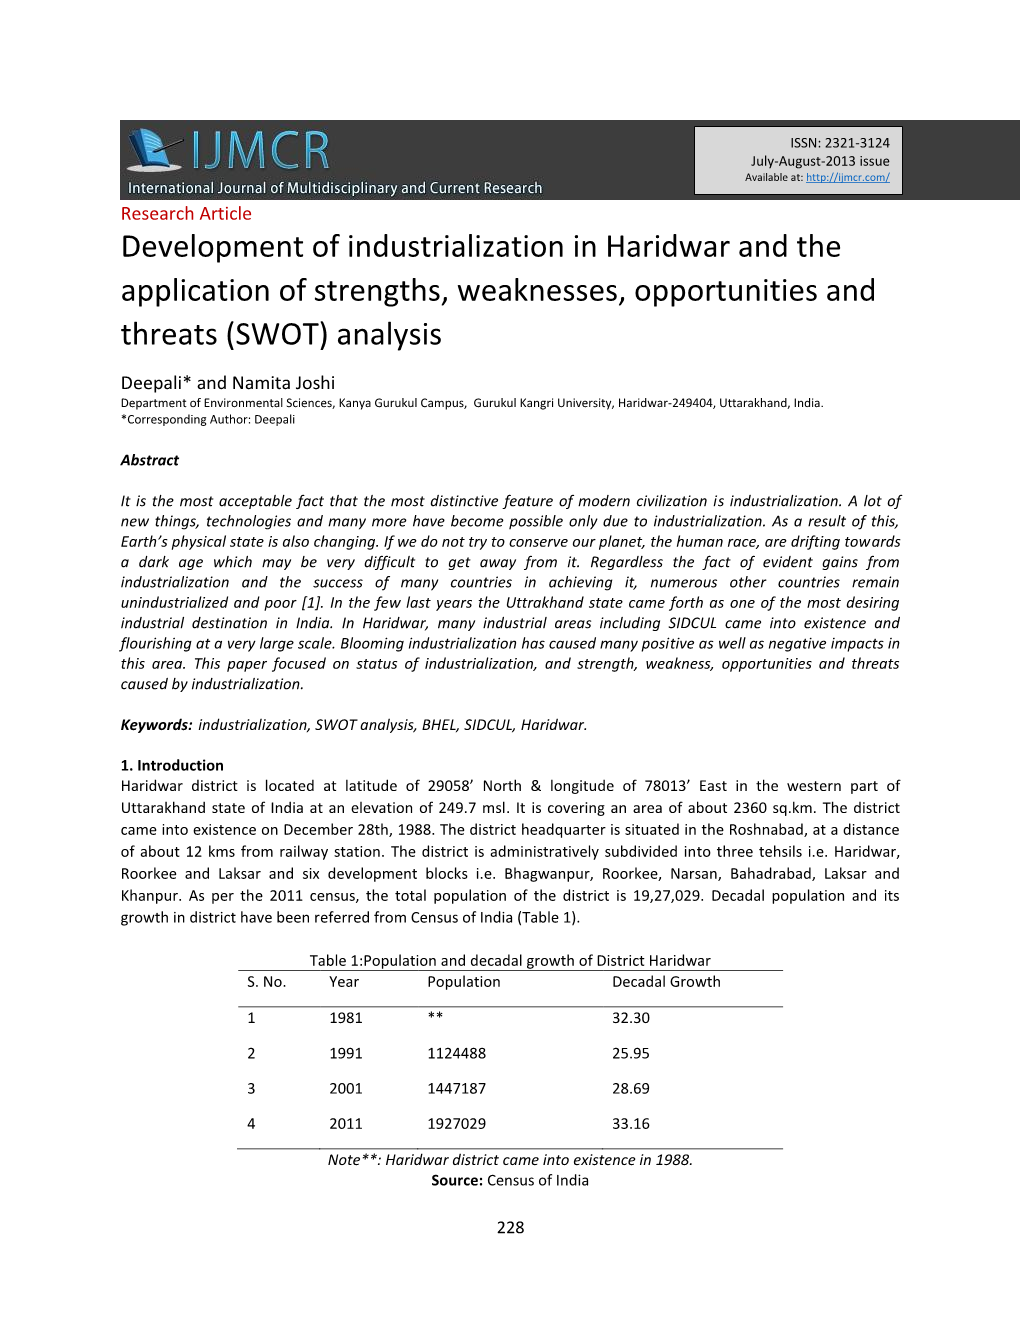 Development of Industrialization in Haridwar and the Application of Strengths, Weaknesses, Opportunities and Threats (SWOT) Analysis